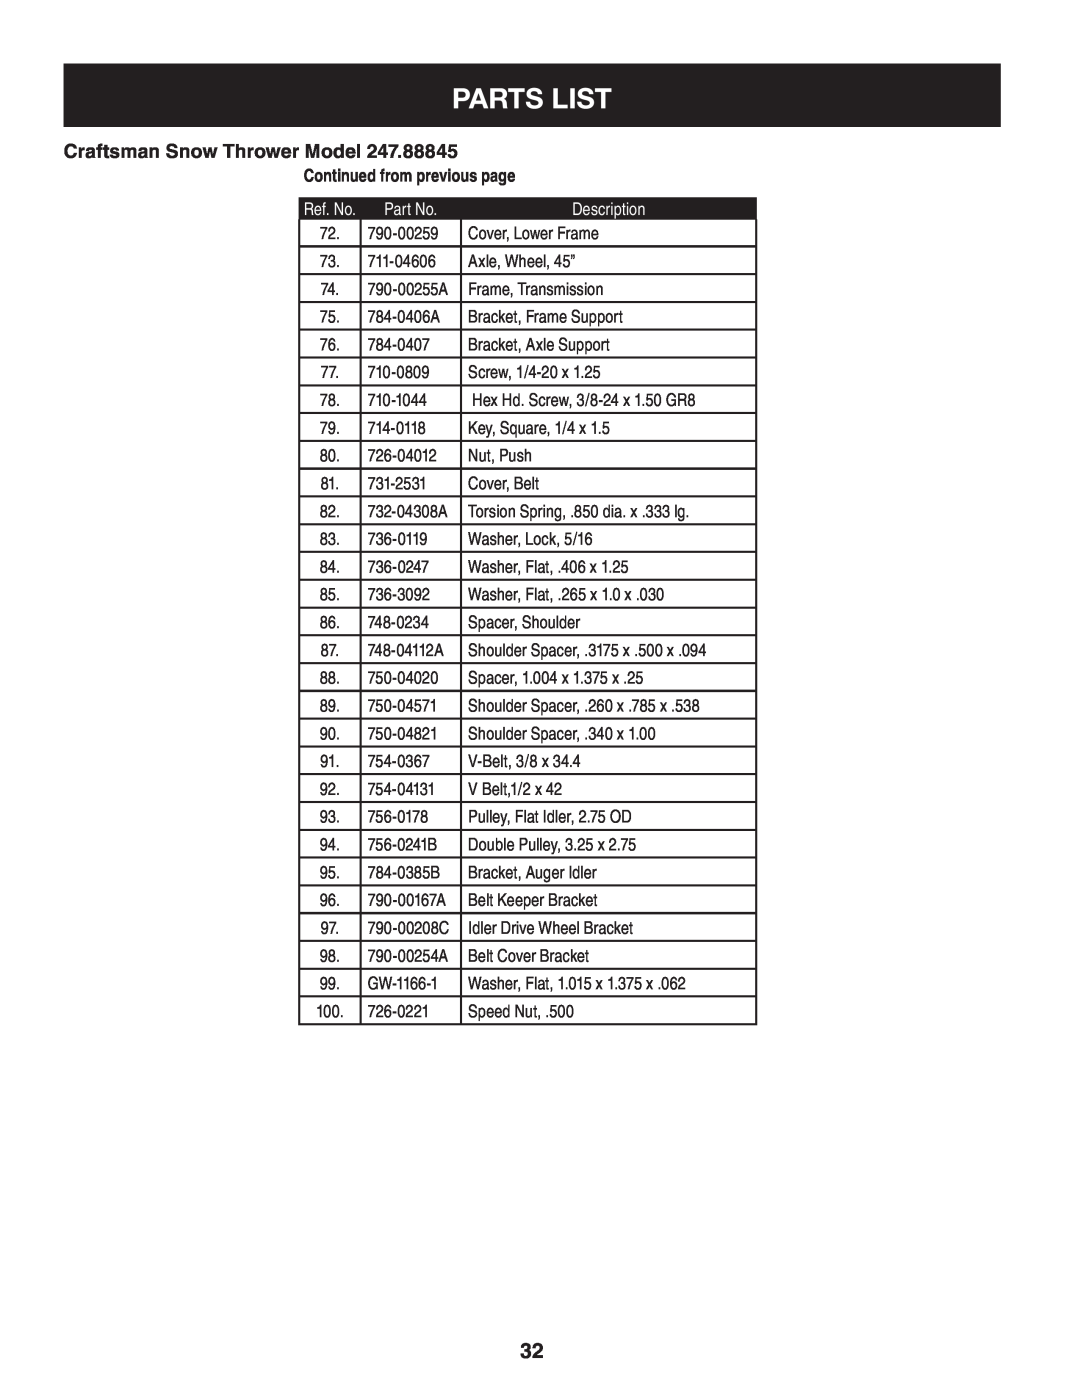 Craftsman 247.88845 Parts List, Craftsman Snow Thrower Model, Continued from previous page, Description, V Belt,1/2 x 